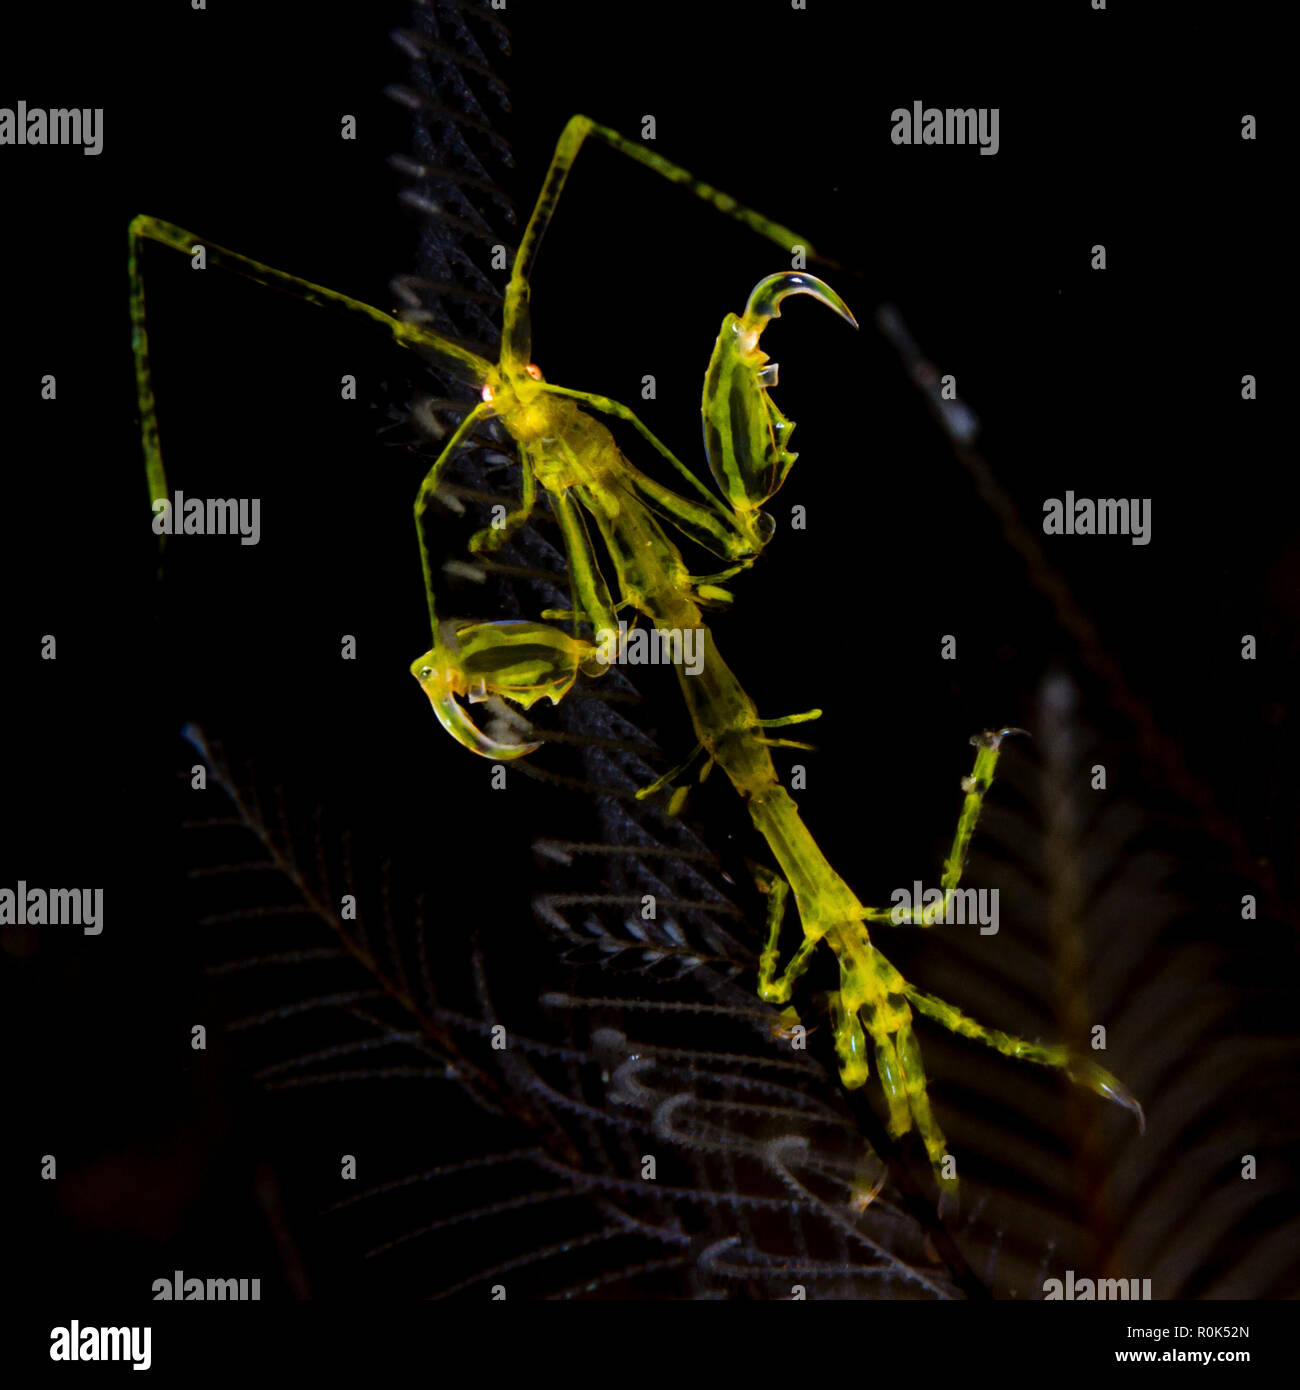 Skeleton shrimp in the waters of Anilao, Philippines. Stock Photo